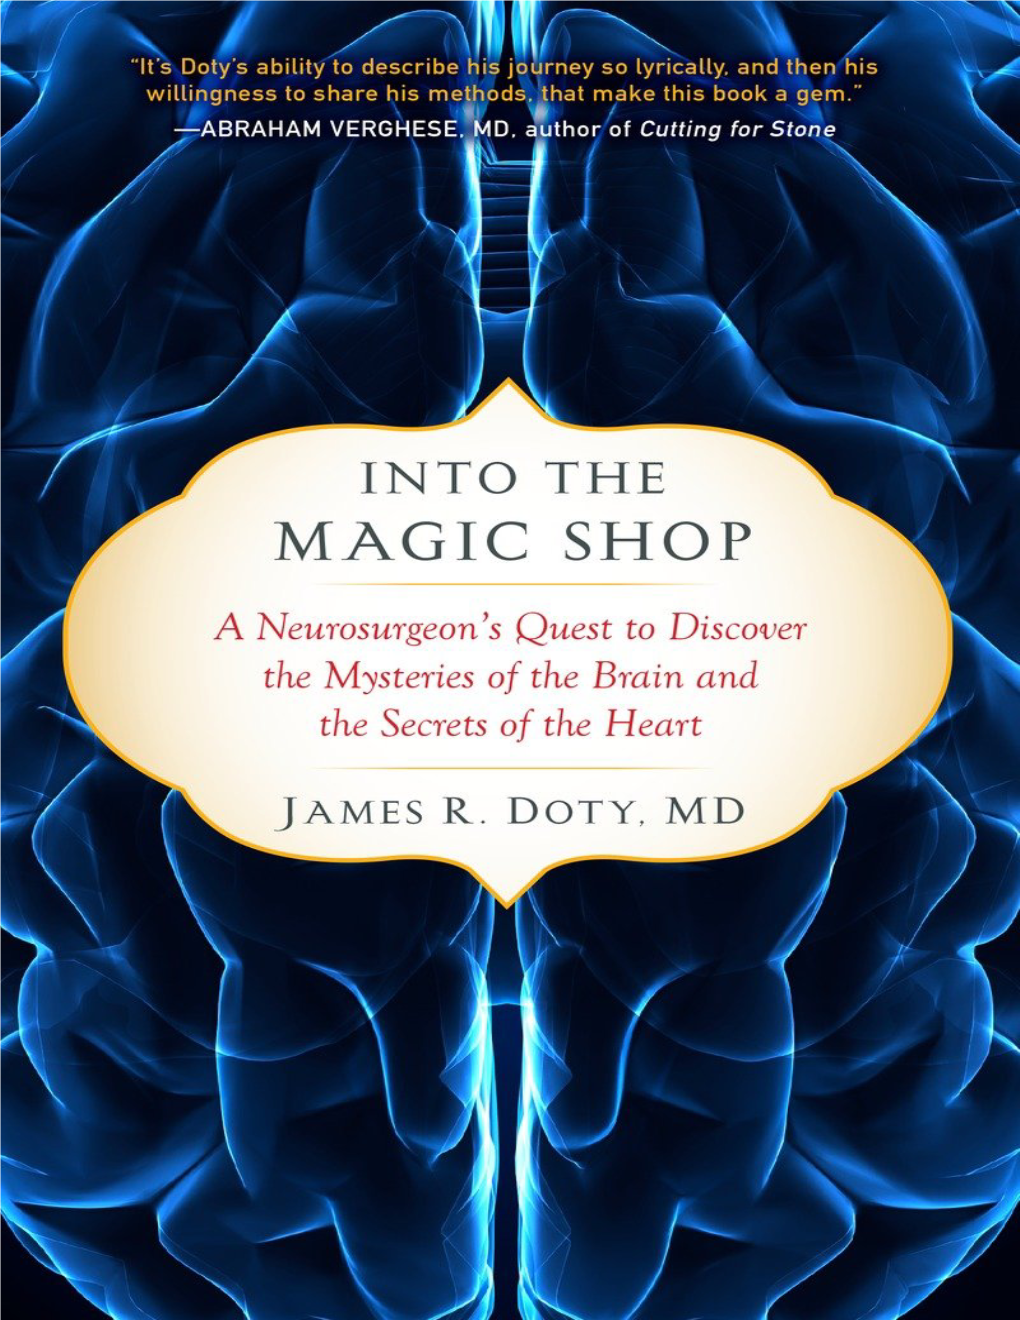 Into the Magic Shop: a Neurosurgeon's Quest to Discover